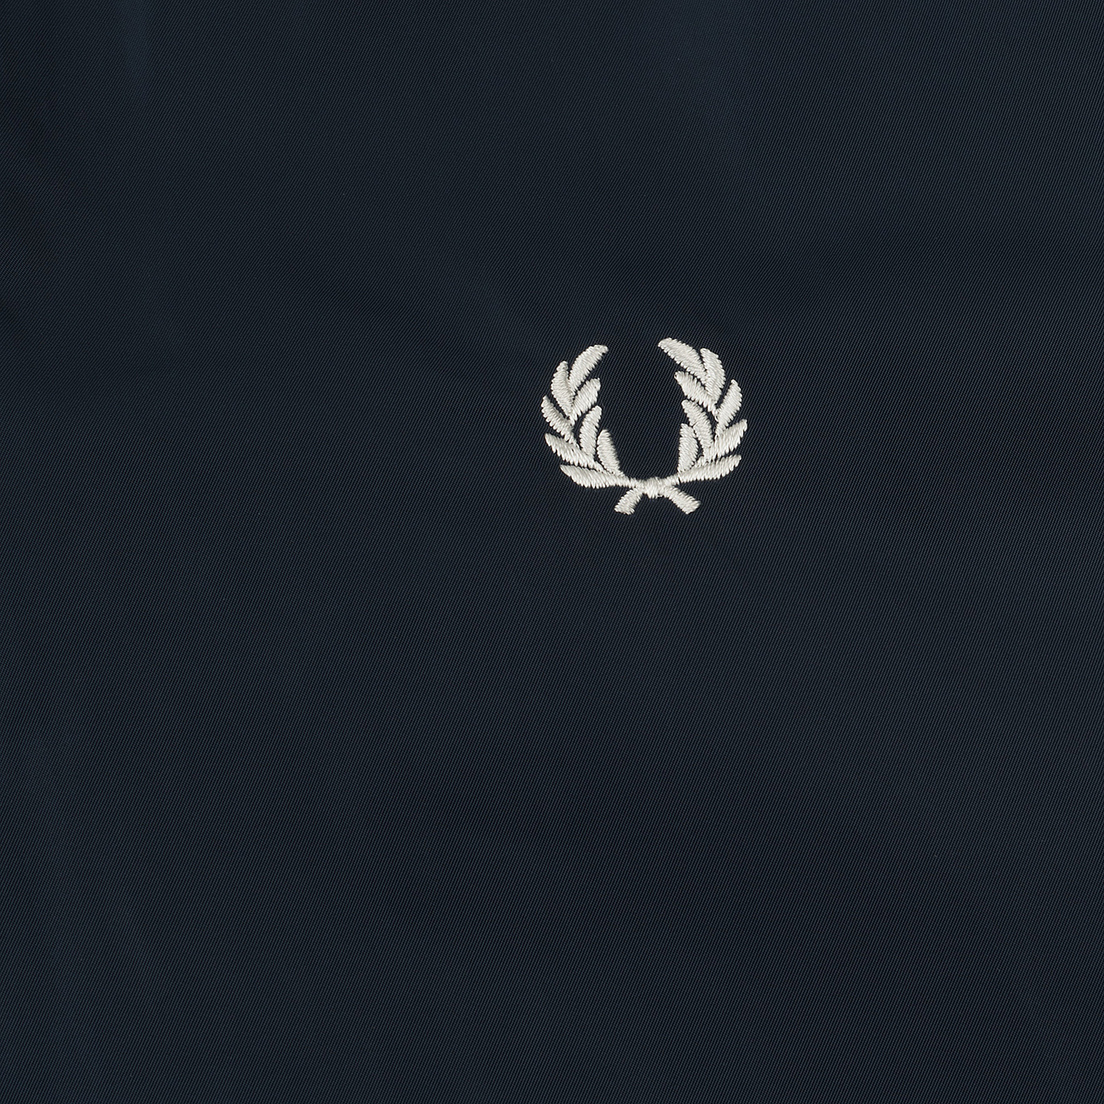 Fred Perry Мужская куртка бомбер Twin Tipped